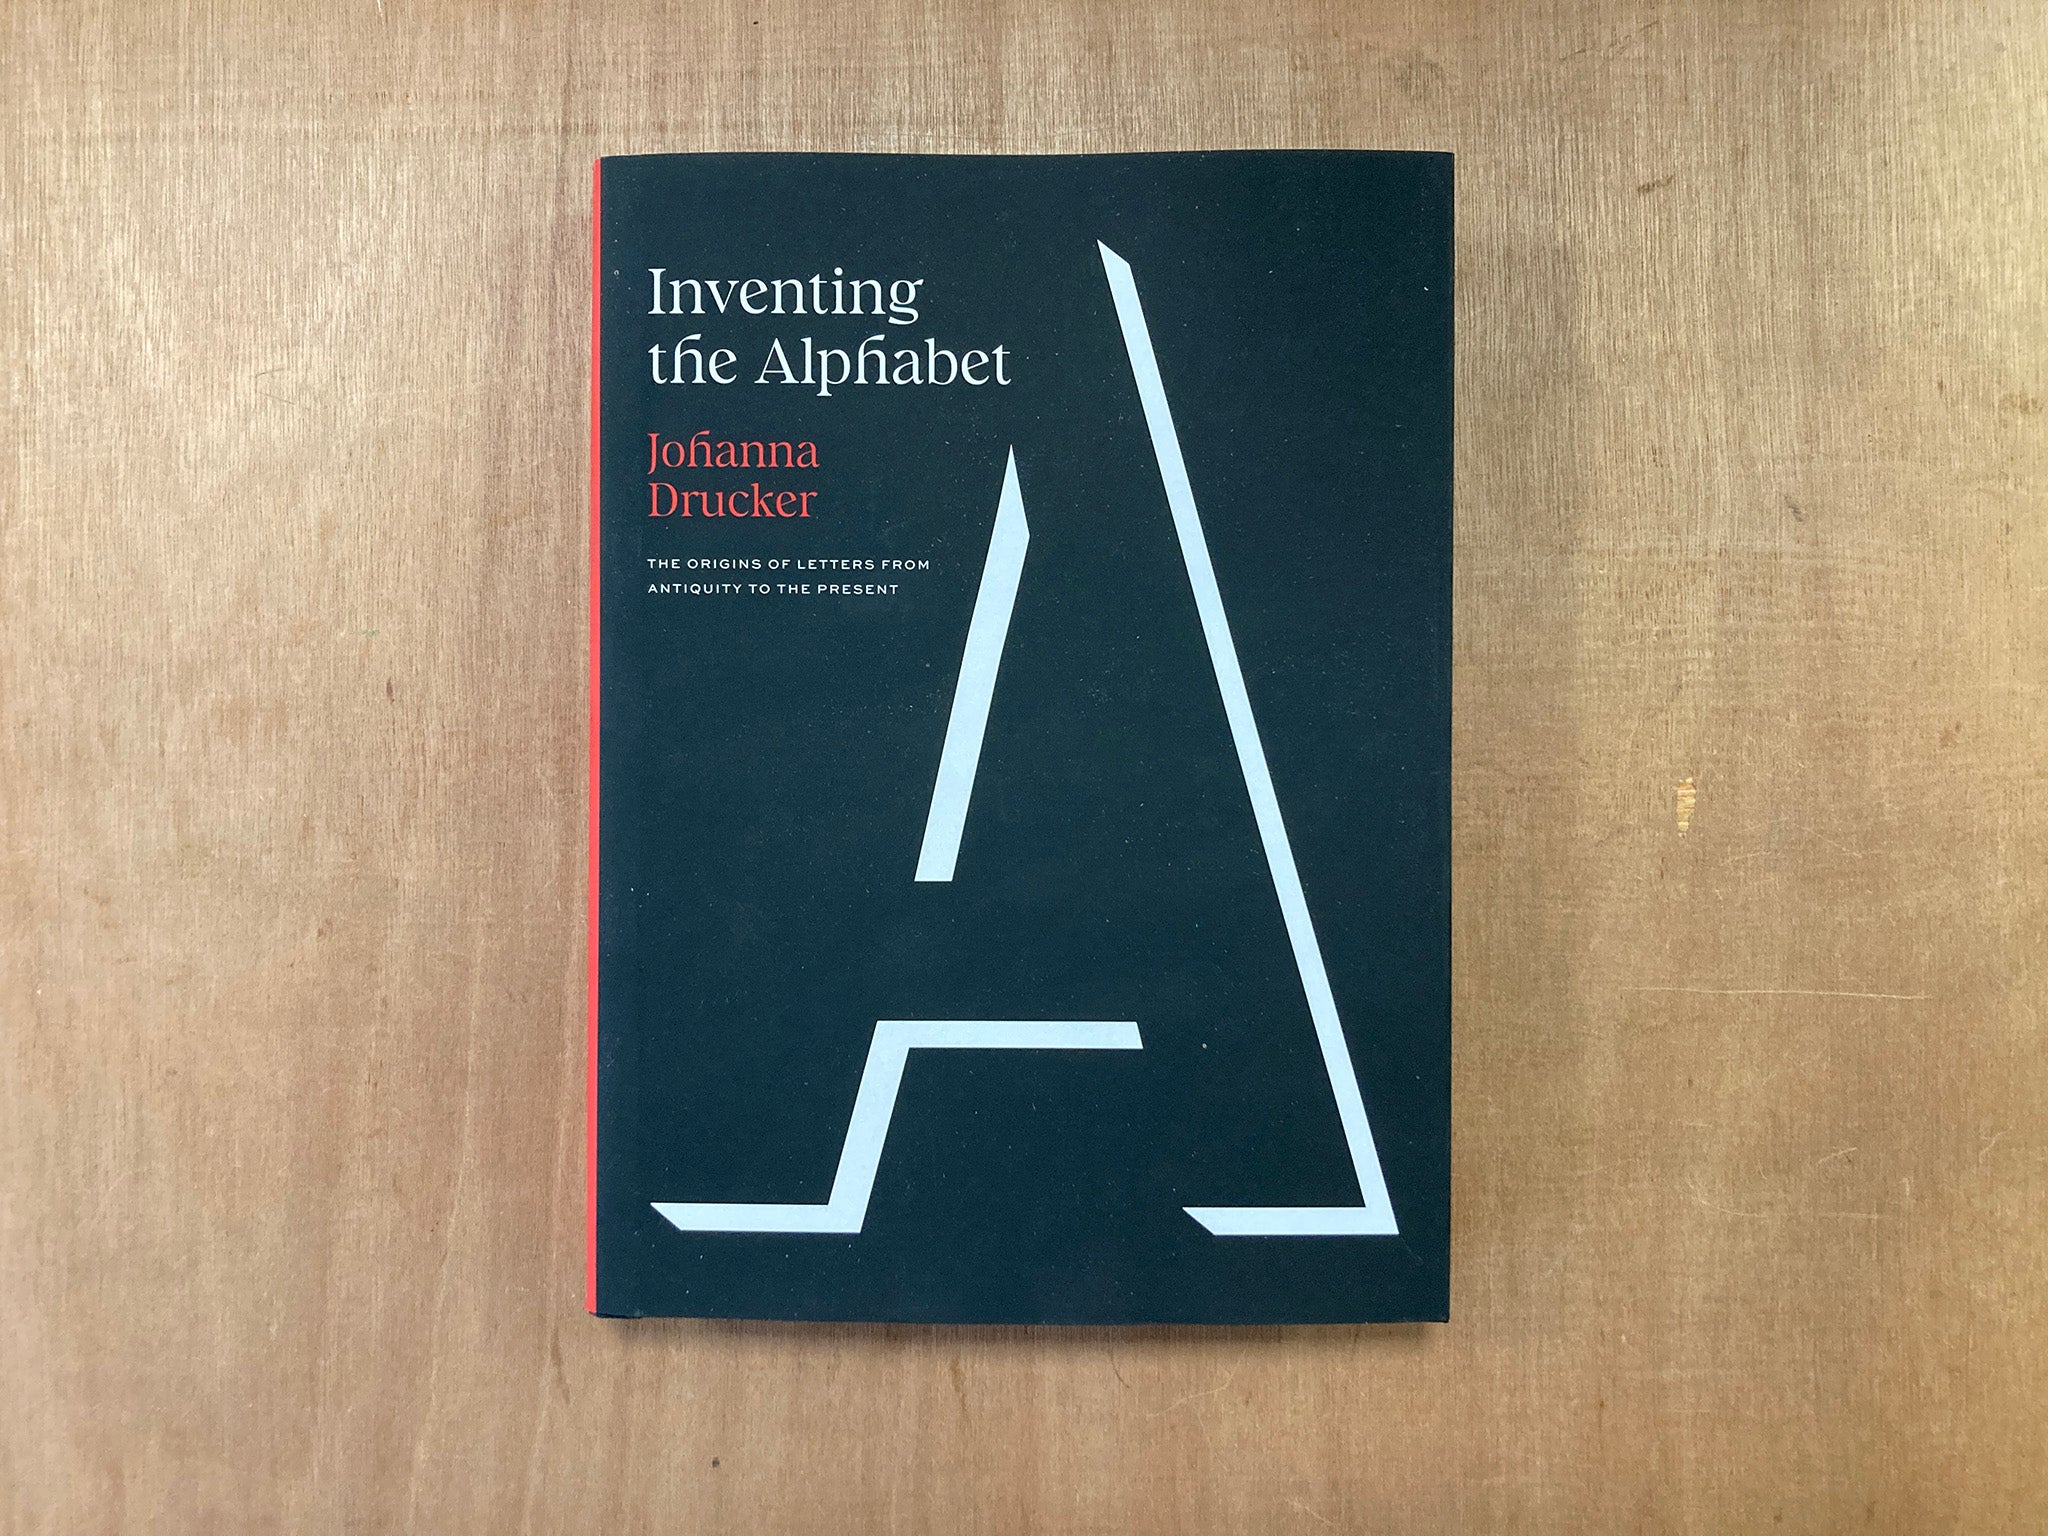 INVENTING THE ALPHABET: THE ORIGINS OF LETTERS FROM ANTIQUITY TO THE PRESENT by Johanna Drucker